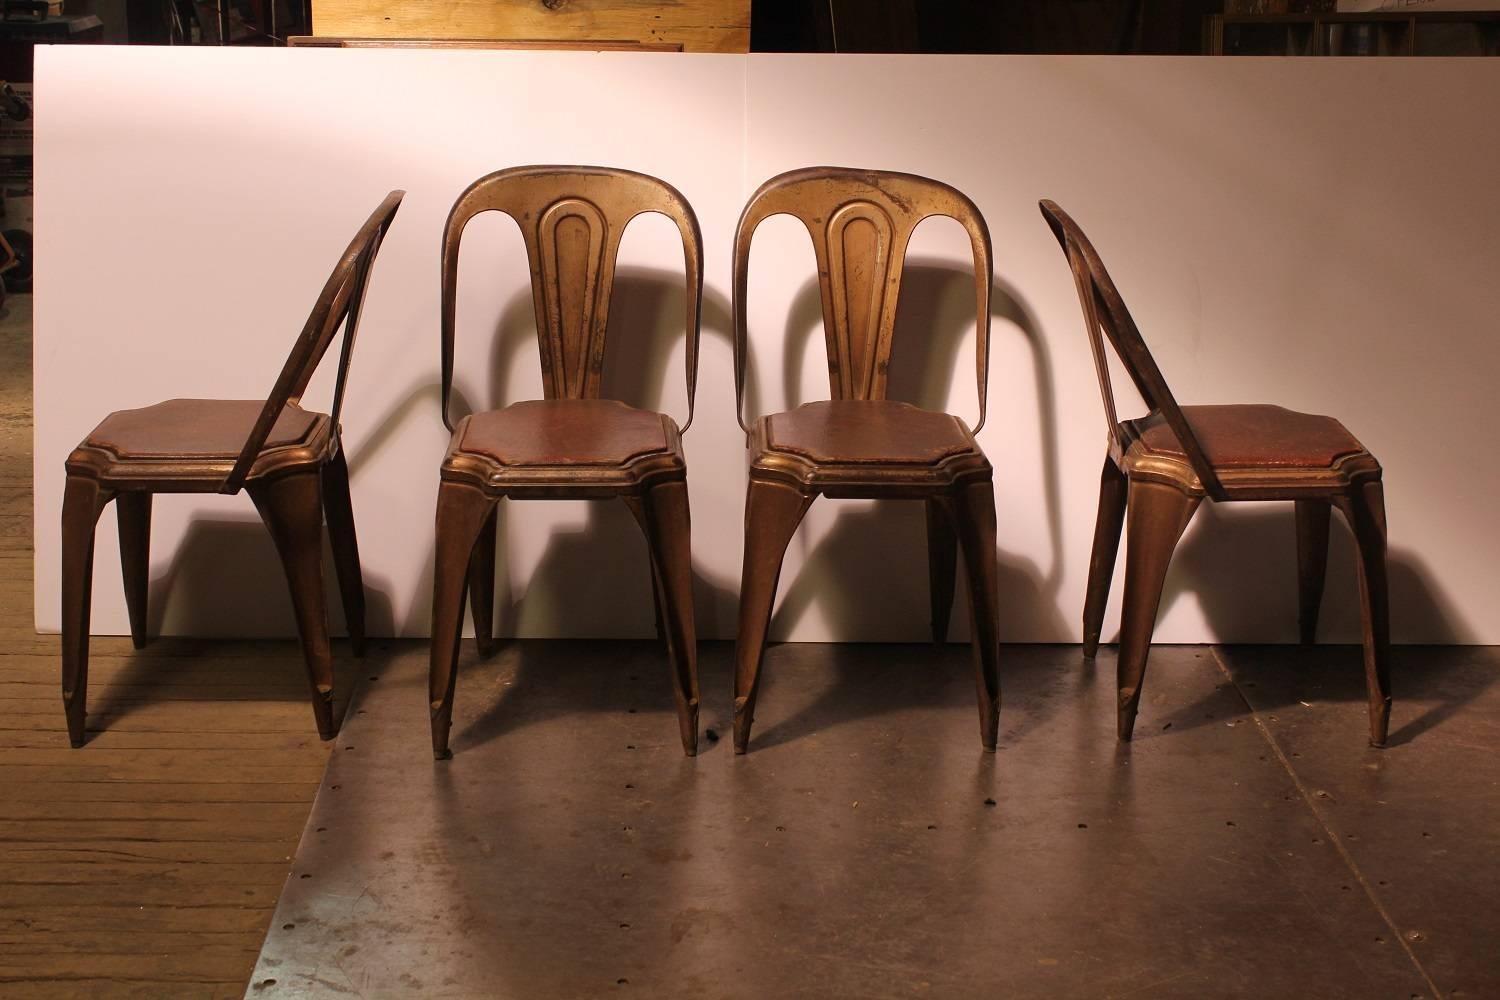 Art Deco Belgian Industrial Metal Chairs With Upholstery seats by Fibrocit. Original condition. Listed price is for one chair. We have ten available. They are stack able. 